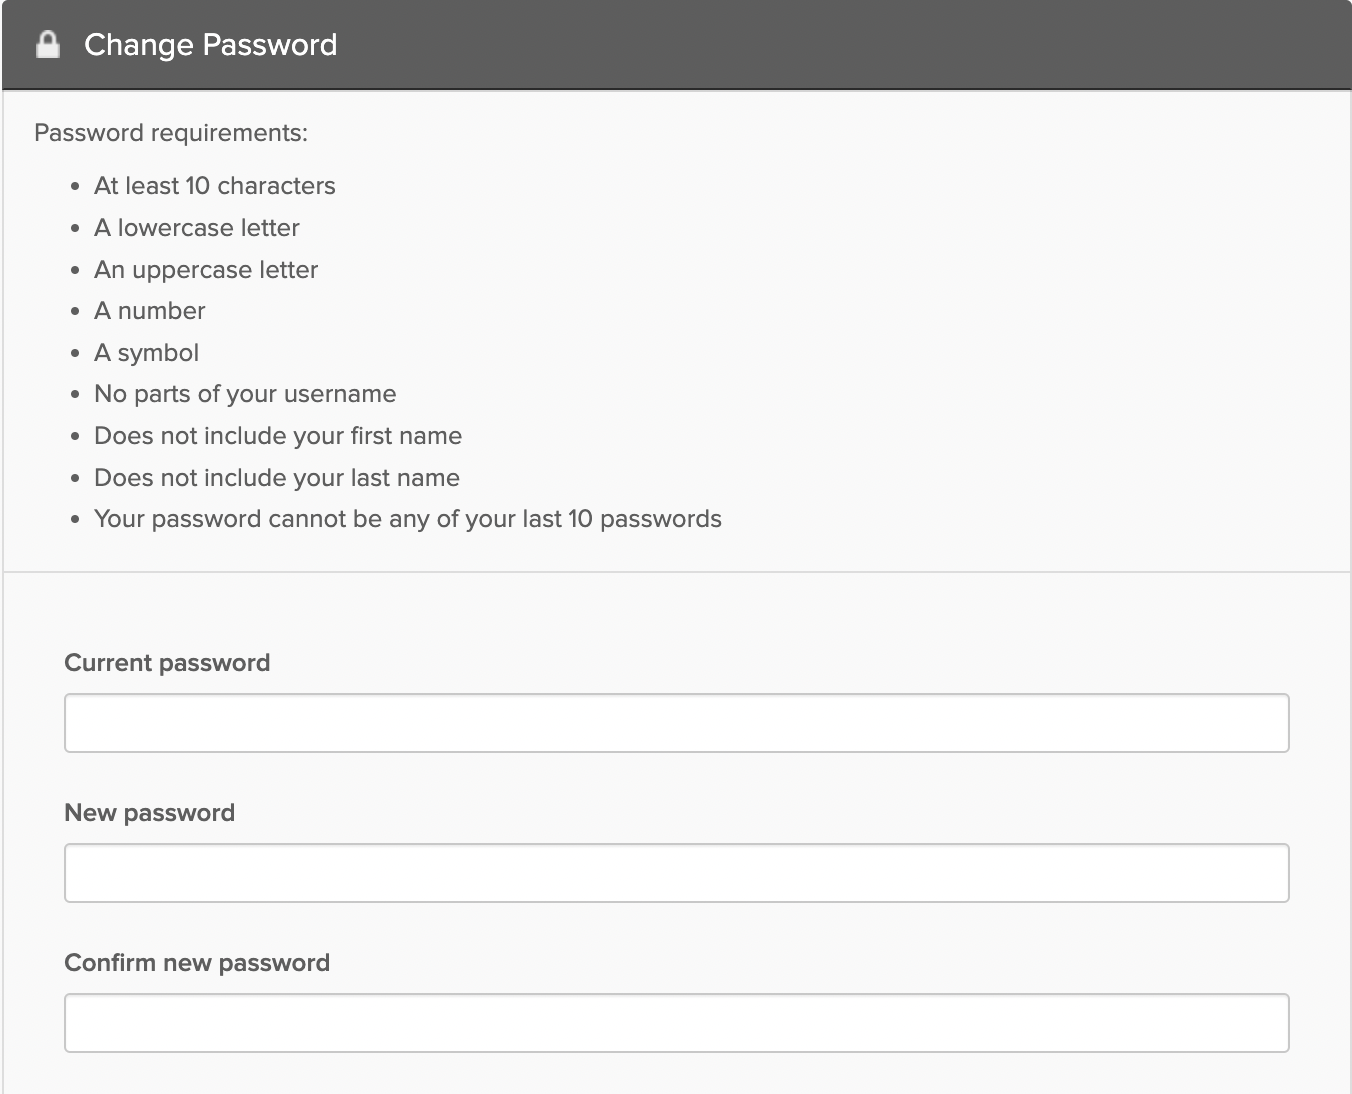 shows form to change password